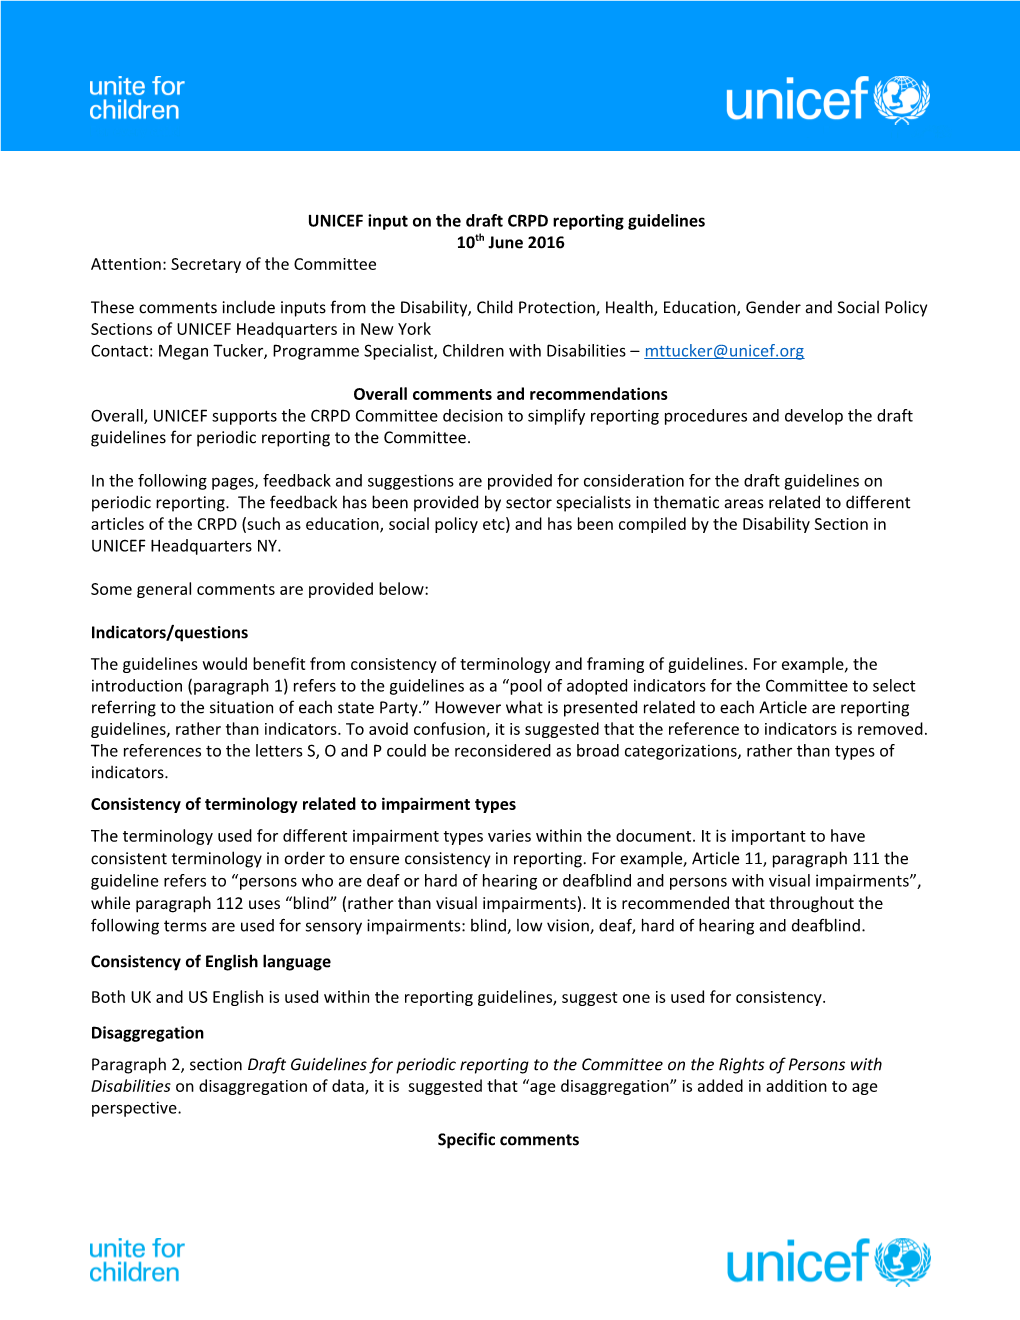 UNICEF Input on the Draft CRPD Reporting Guidelines